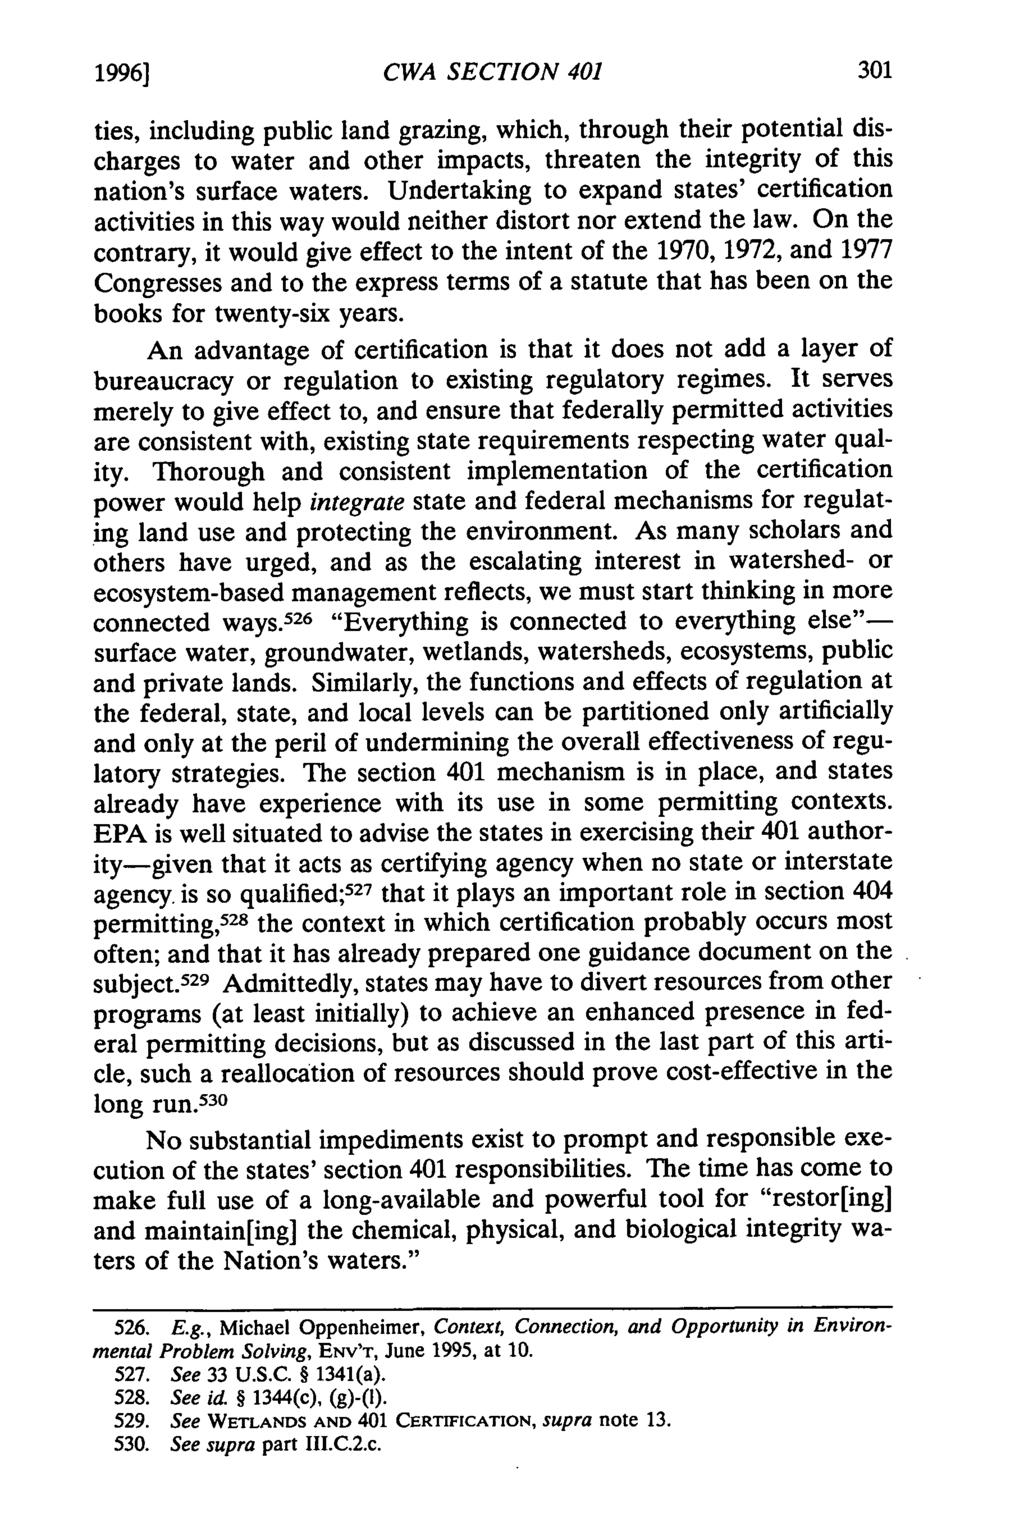 1996] CWA SECTION 401 ties, including public land grazing, which, through their potential discharges to water and other impacts, threaten the integrity of this nation's surface waters.